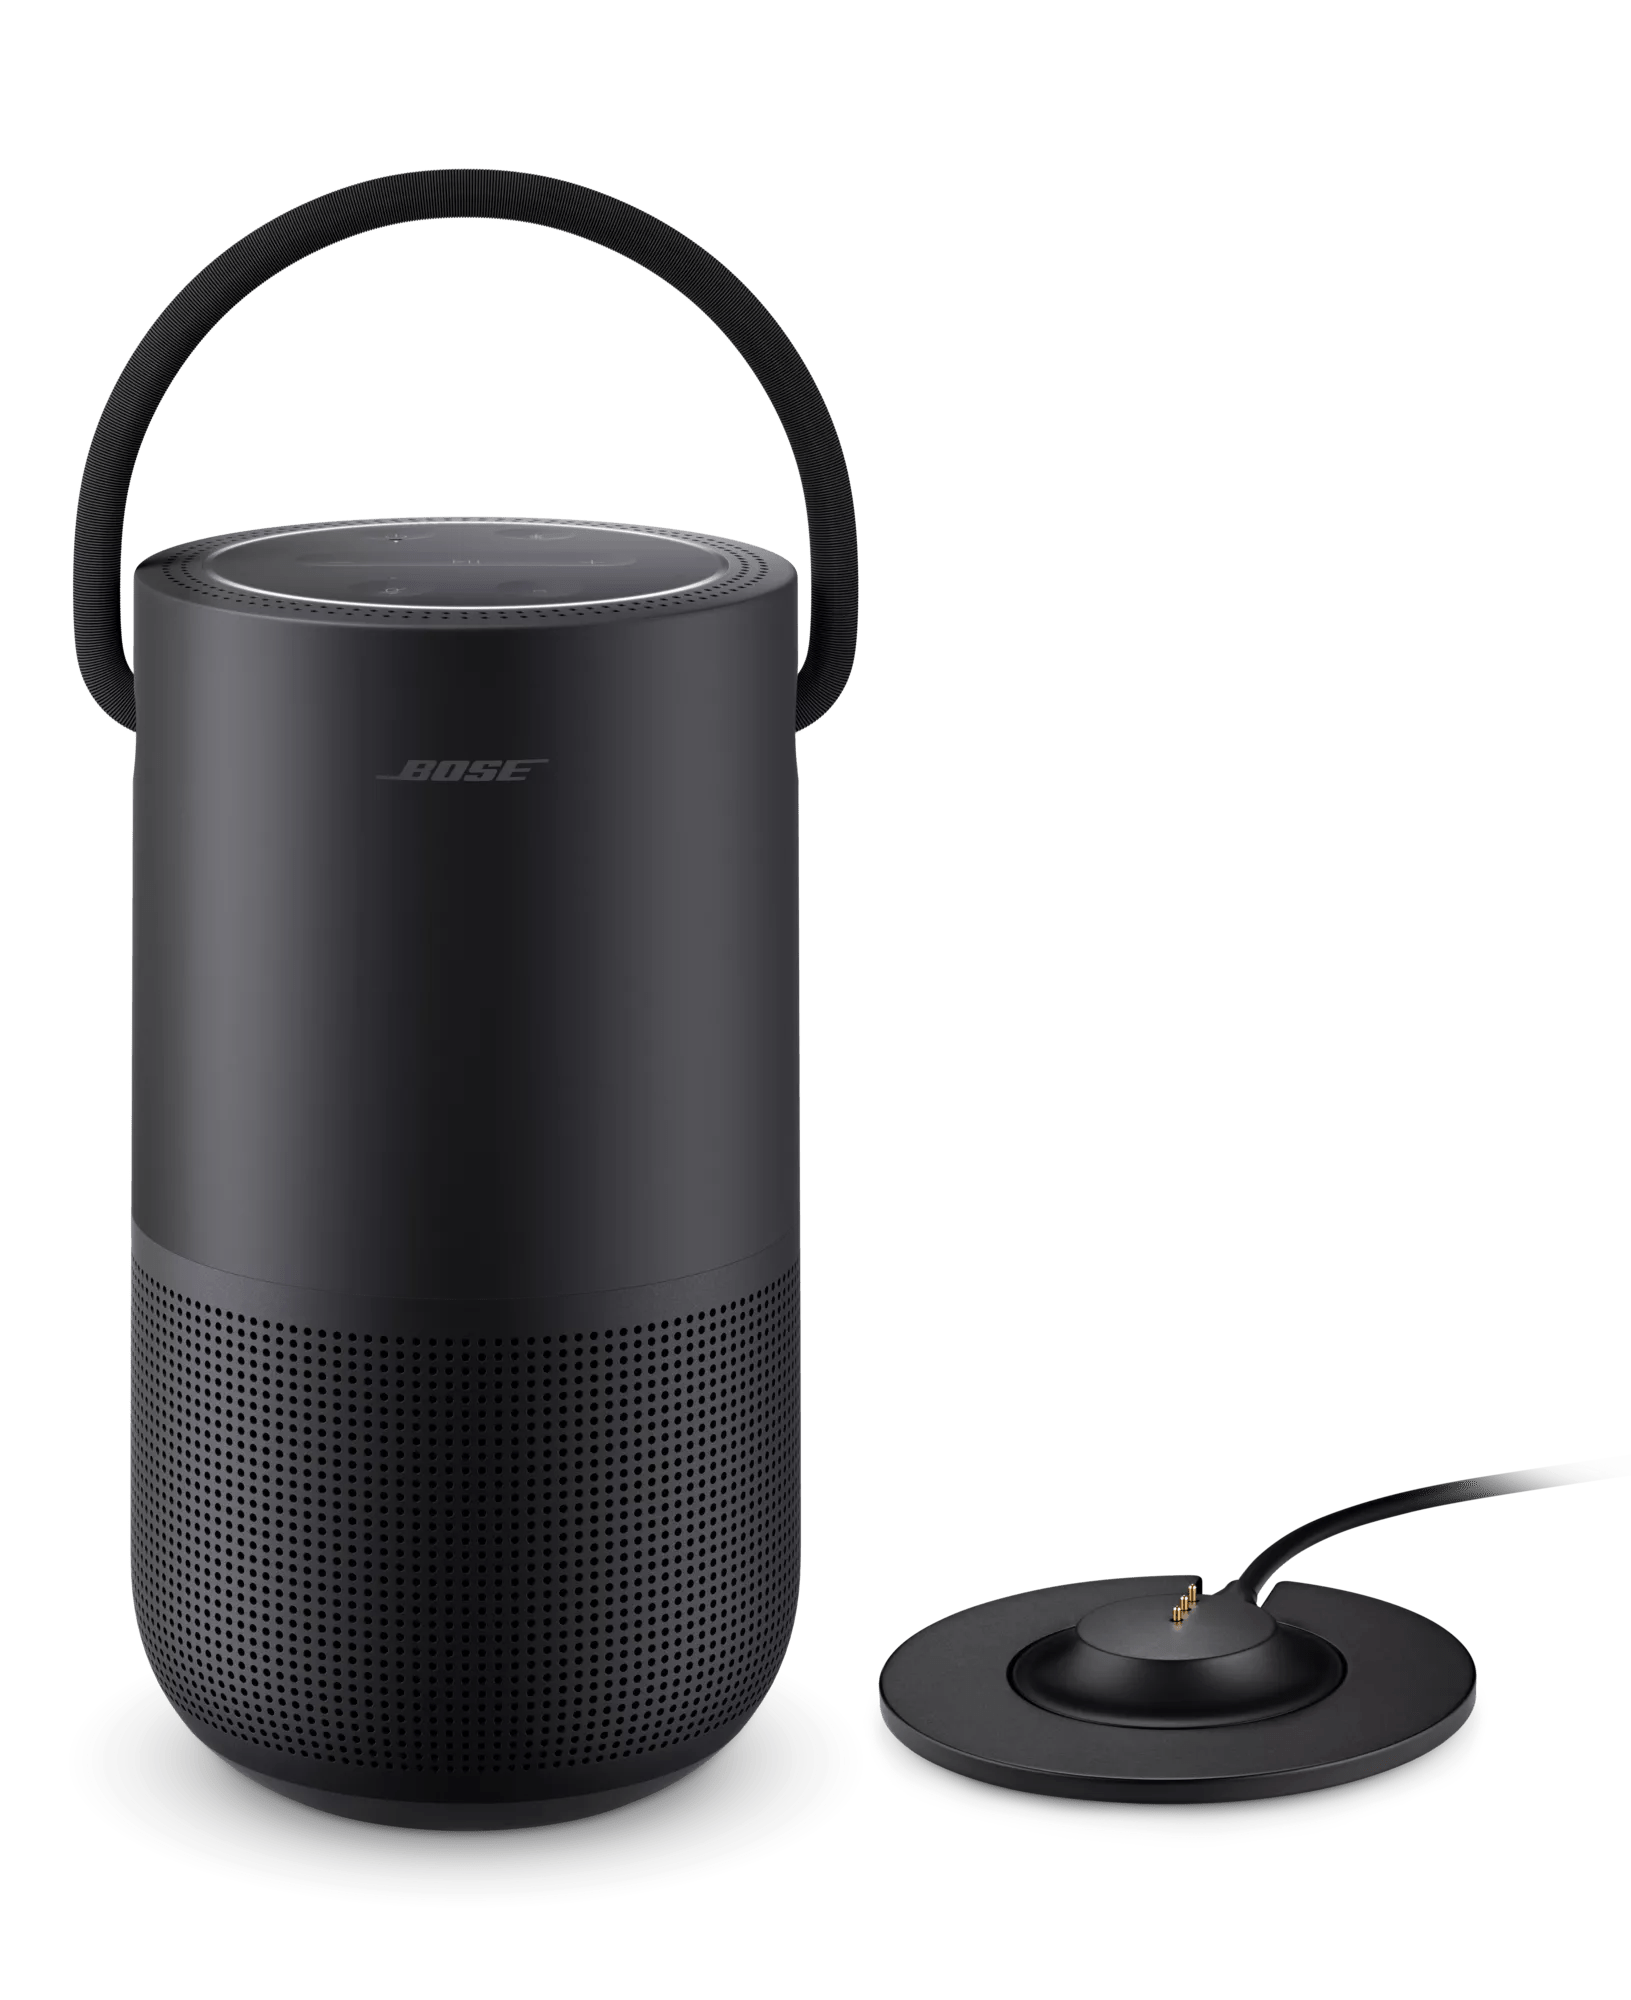 Pair and Power Smart Speaker with Wireless Charging Cradle